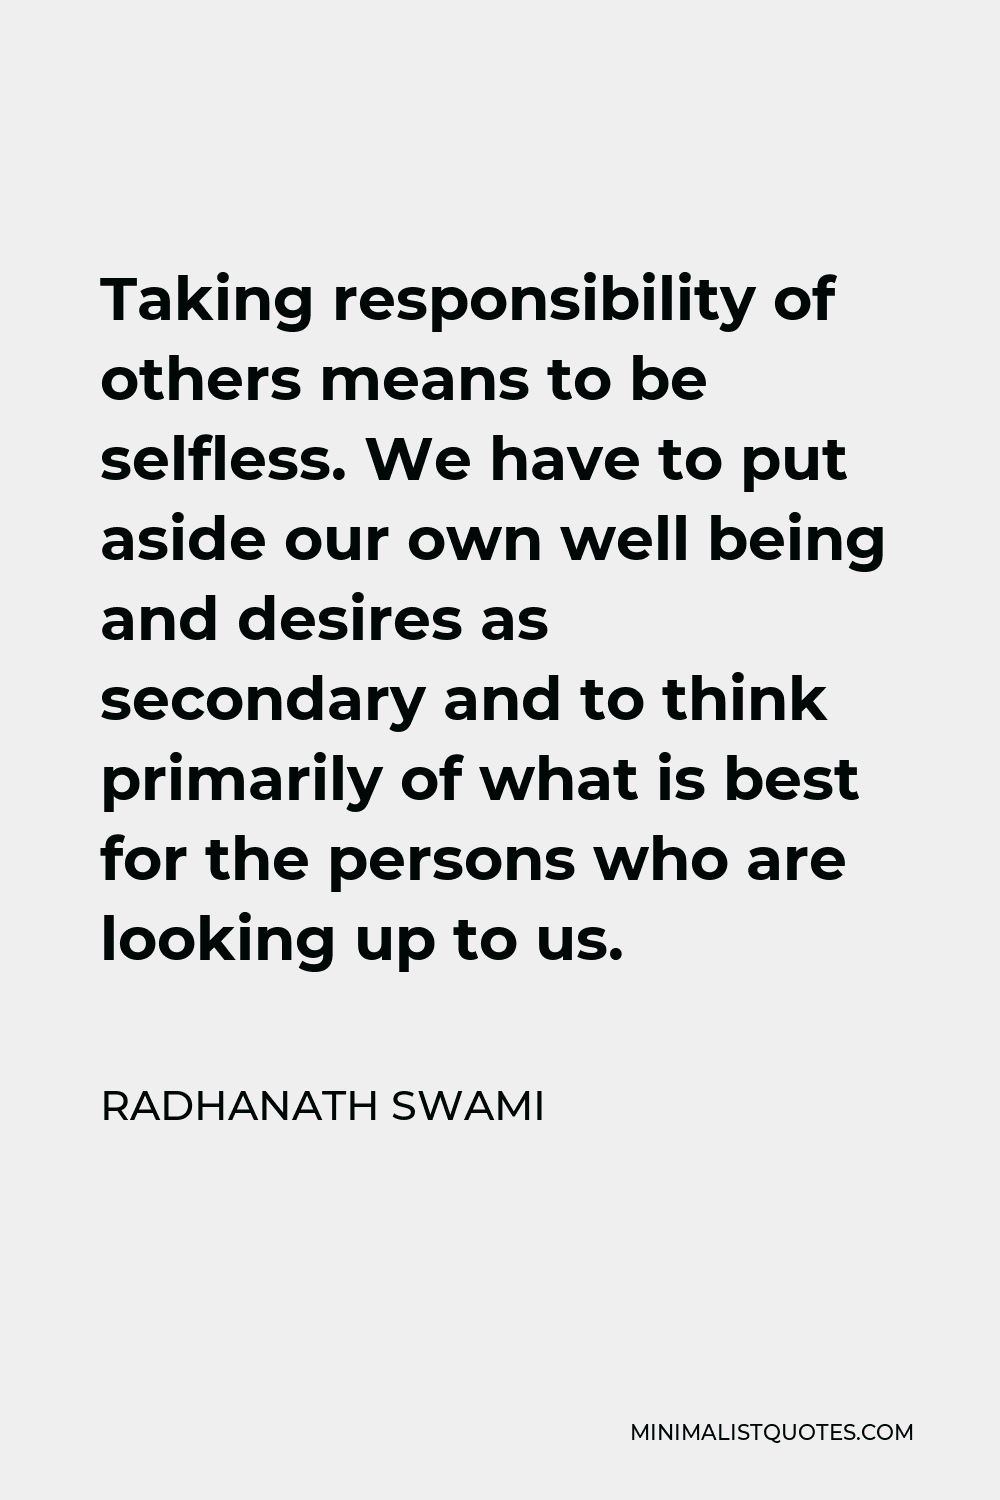 Radhanath Swami Quote - Taking responsibility of others means to be selfless. We have to put aside our own well being and desires as secondary and to think primarily of what is best for the persons who are looking up to us.